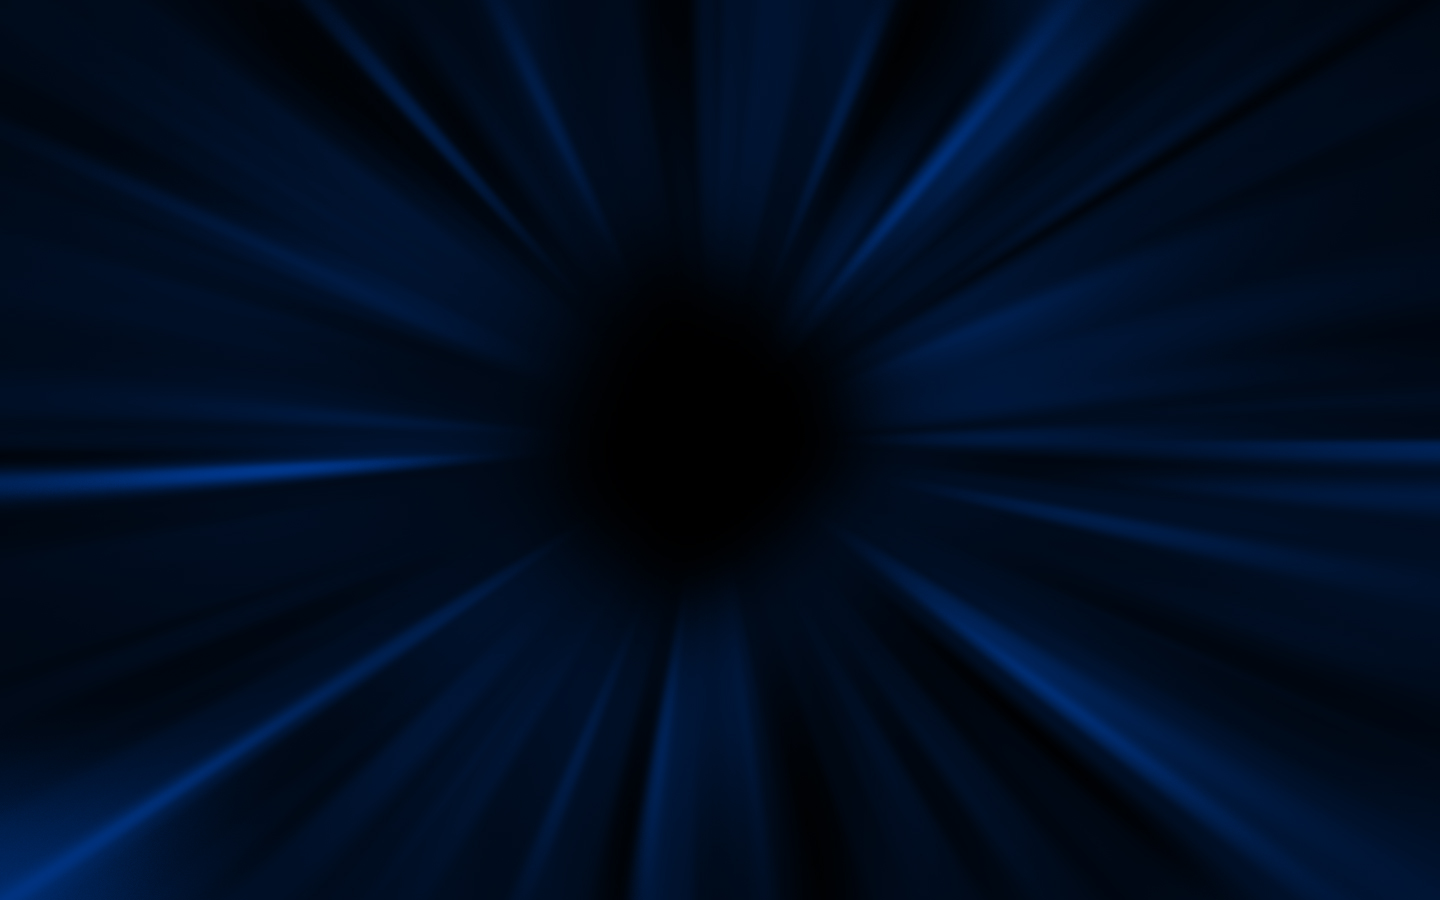 Dark Blue Abstract Painting 13 Wallpaper Background Hd 1440900 1440x900